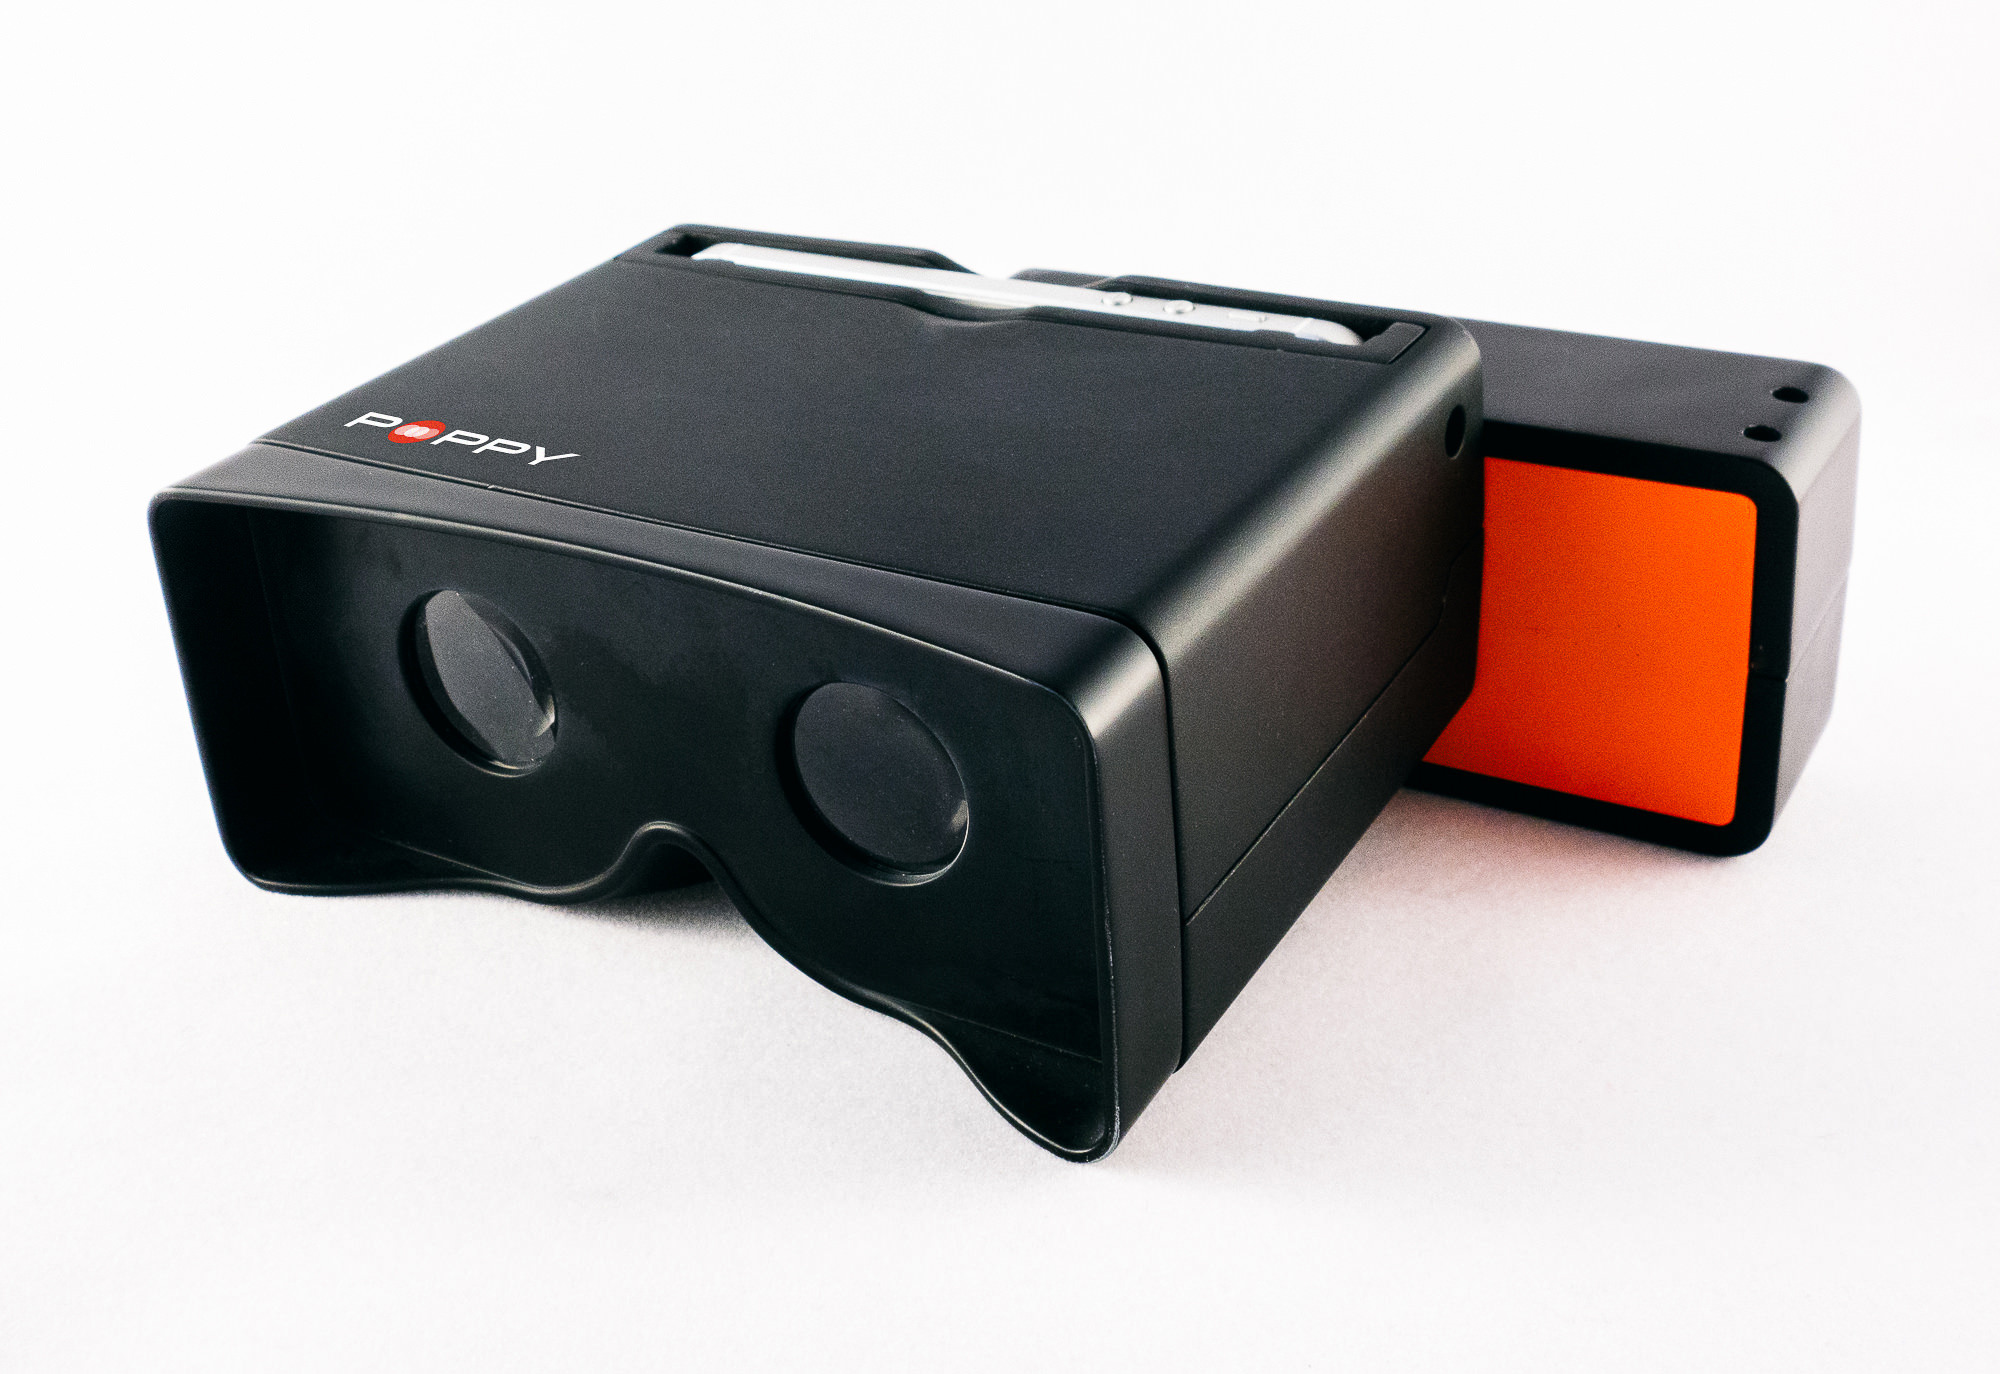 Poppy turns your iPhone into a 3D camera